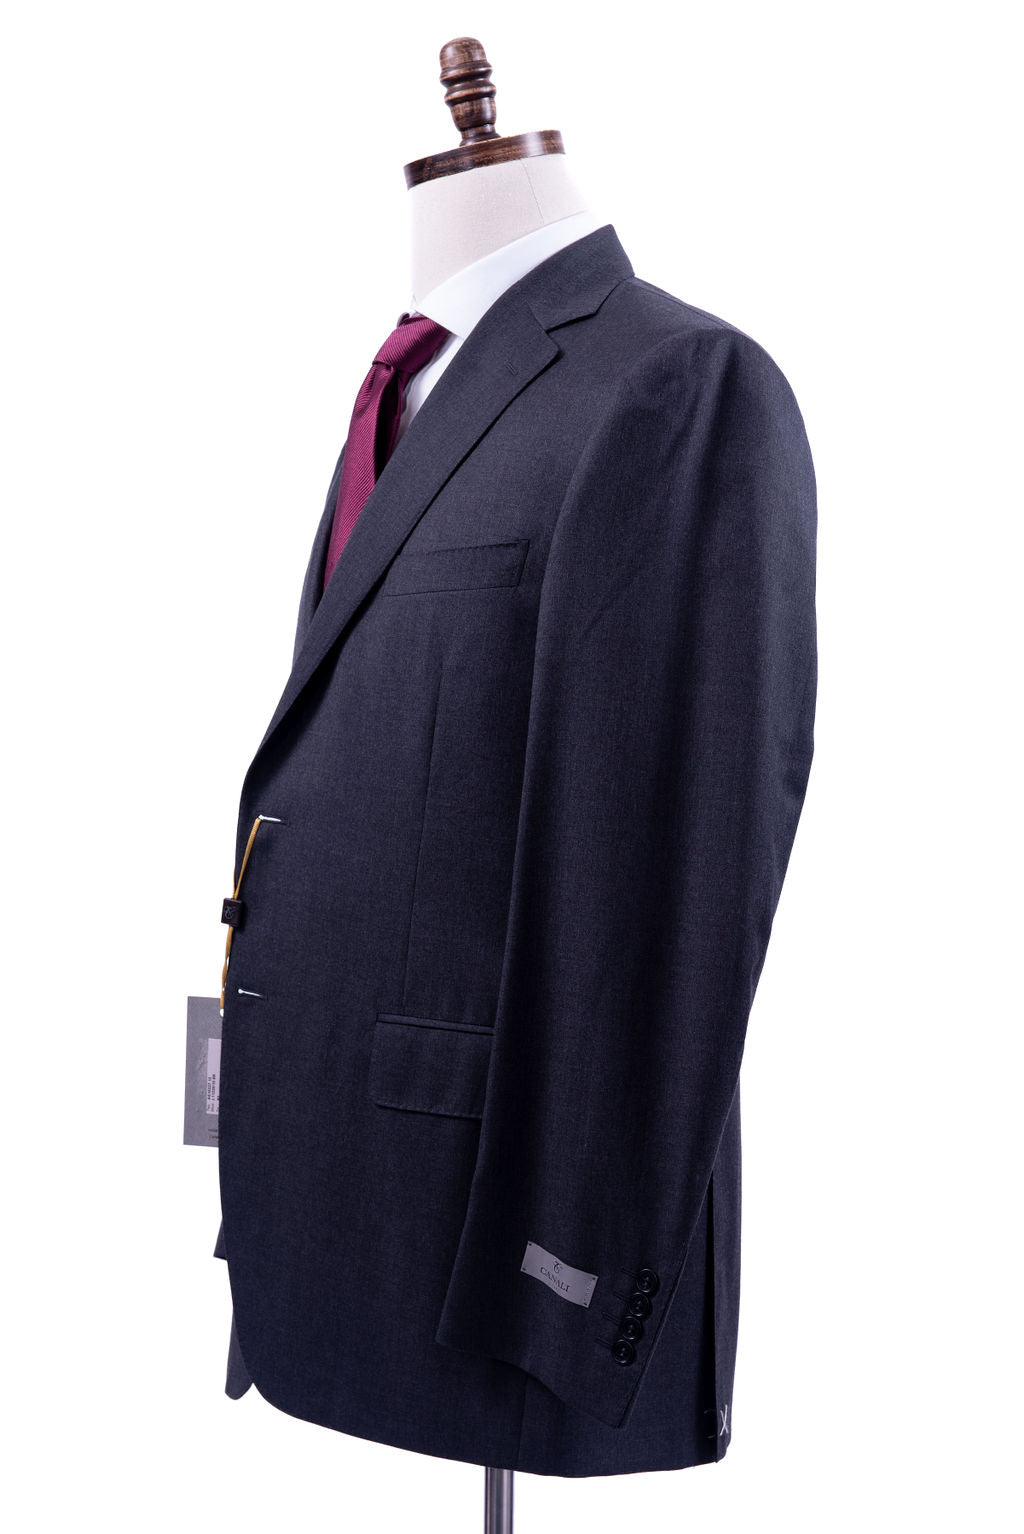 Canali 1934 Mens Solid Charocal Gray 42R Drop 6 100% Wool 2 Button 2 Piece Suit